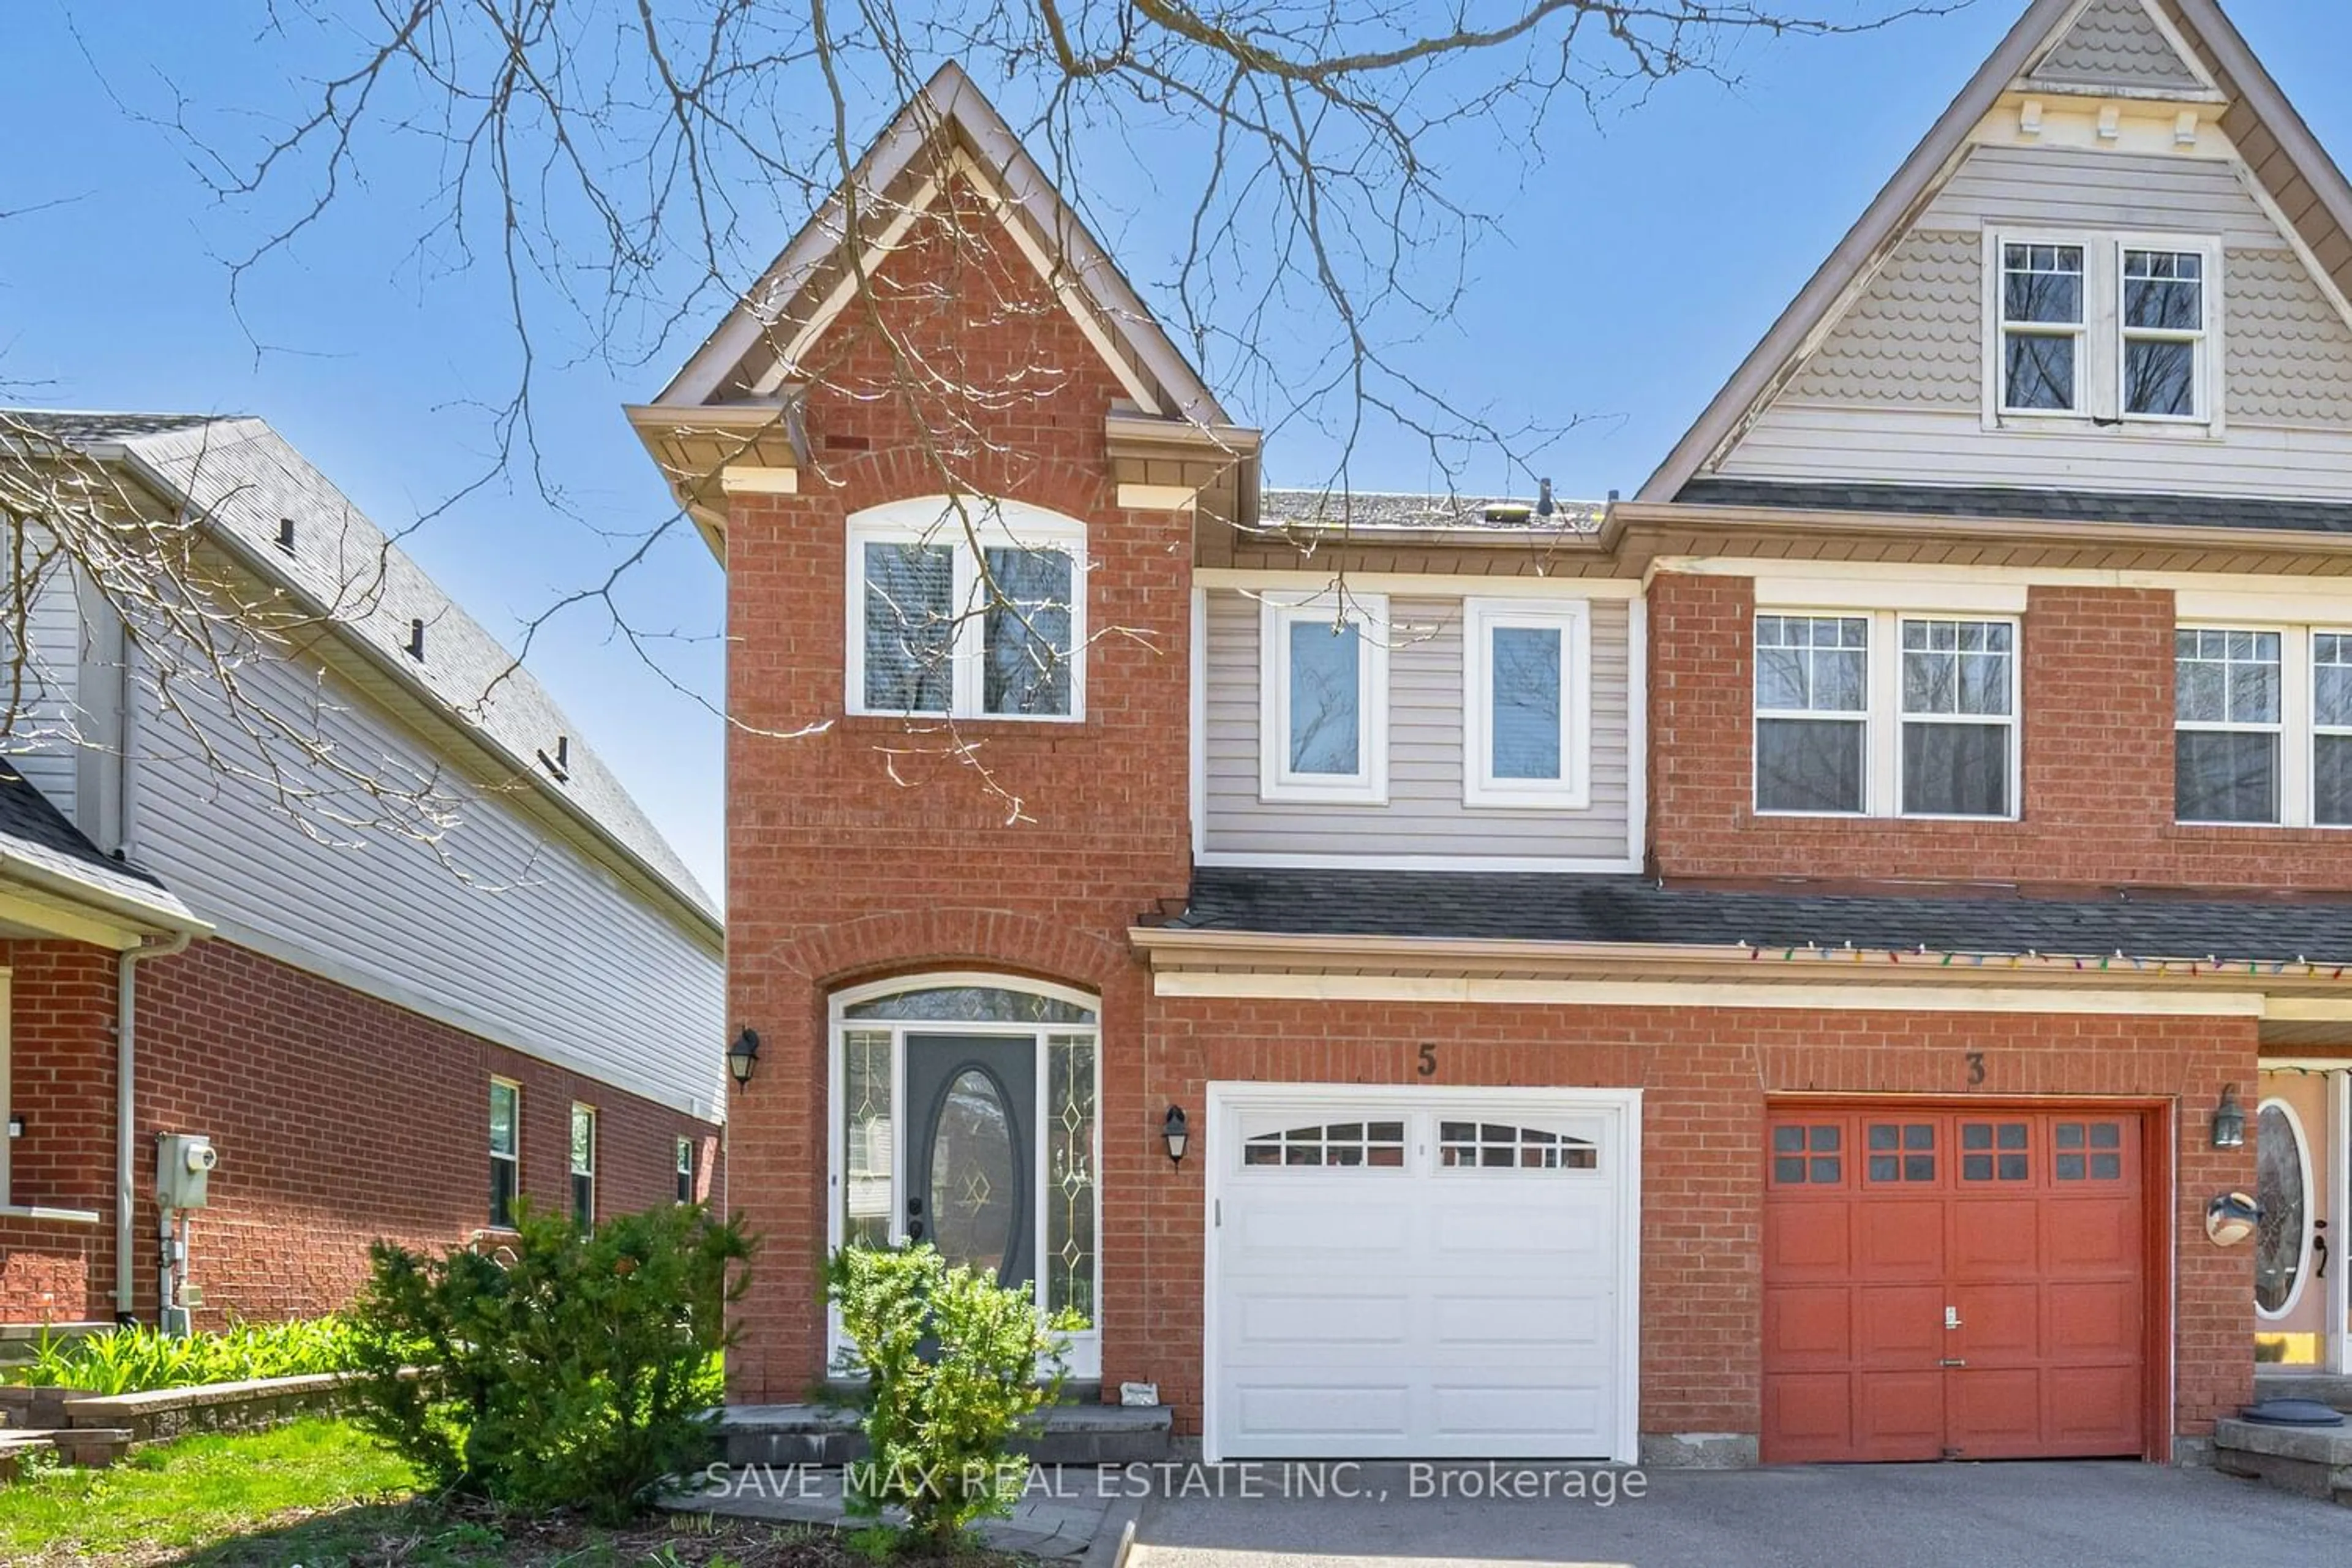 Home with brick exterior material for 5 Mugford Rd, Aurora Ontario L4G 7H4